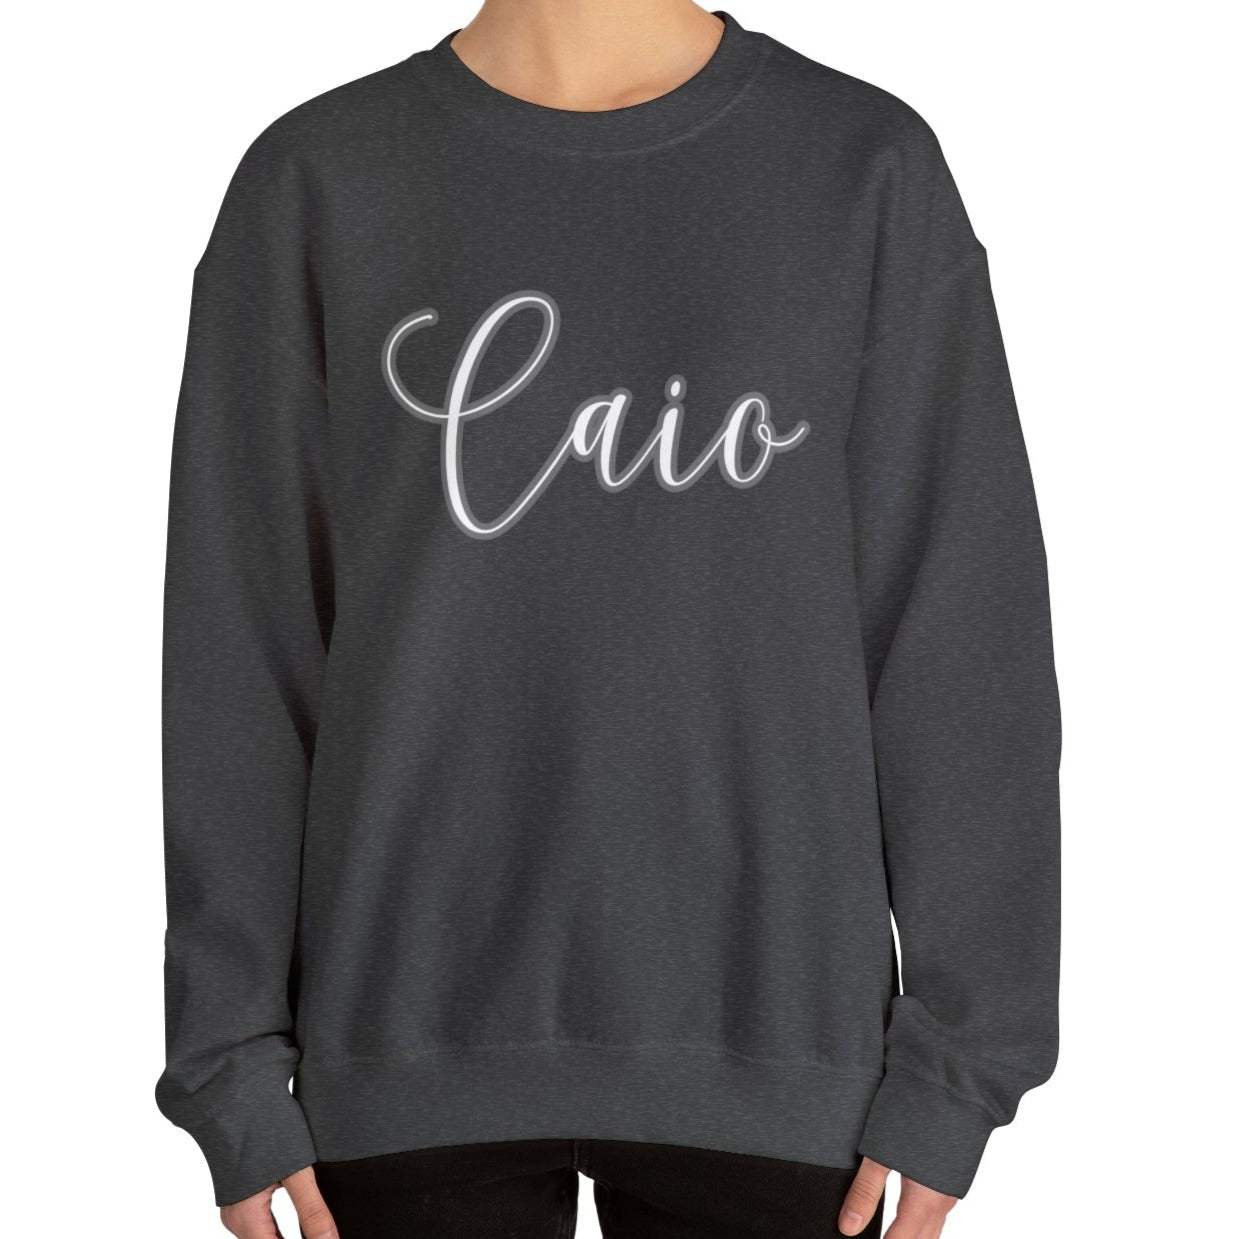 Ciao Chic: Women's Comfort Sweatshirt for Effortless Style - Eddy and Rita